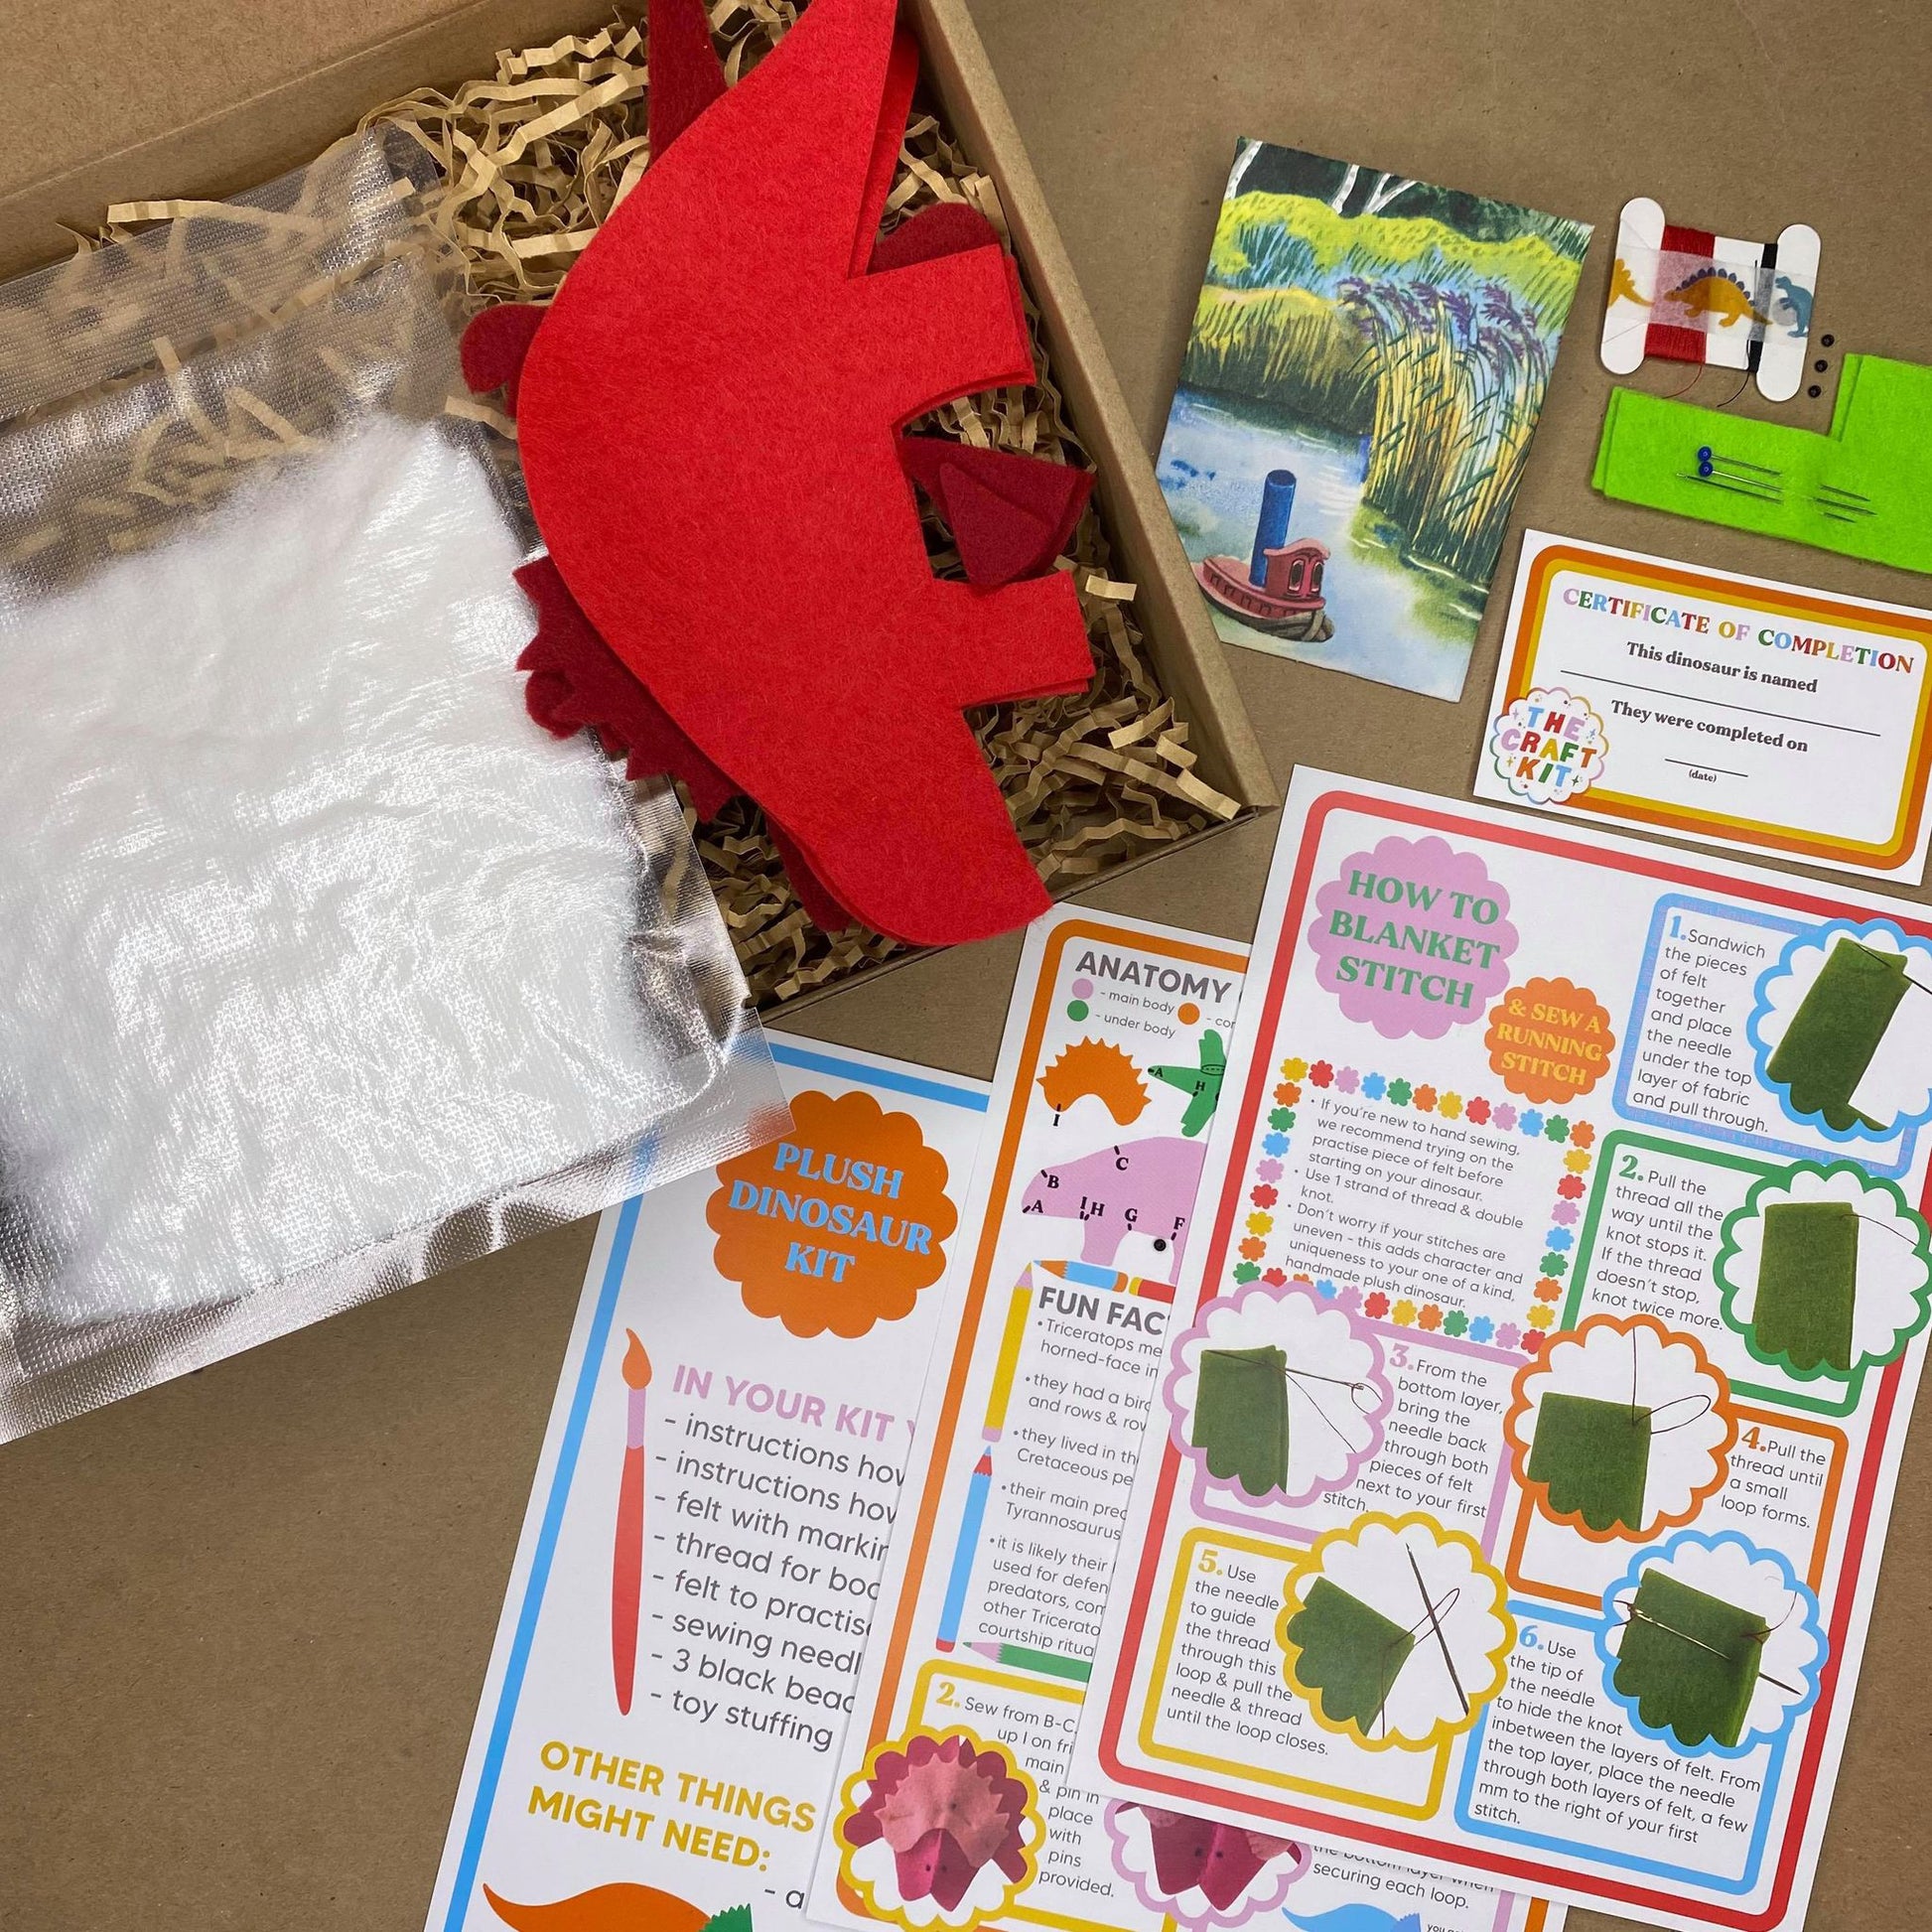 contents of brontosaurus plush toy kit boxfrom the crafty cowgirl